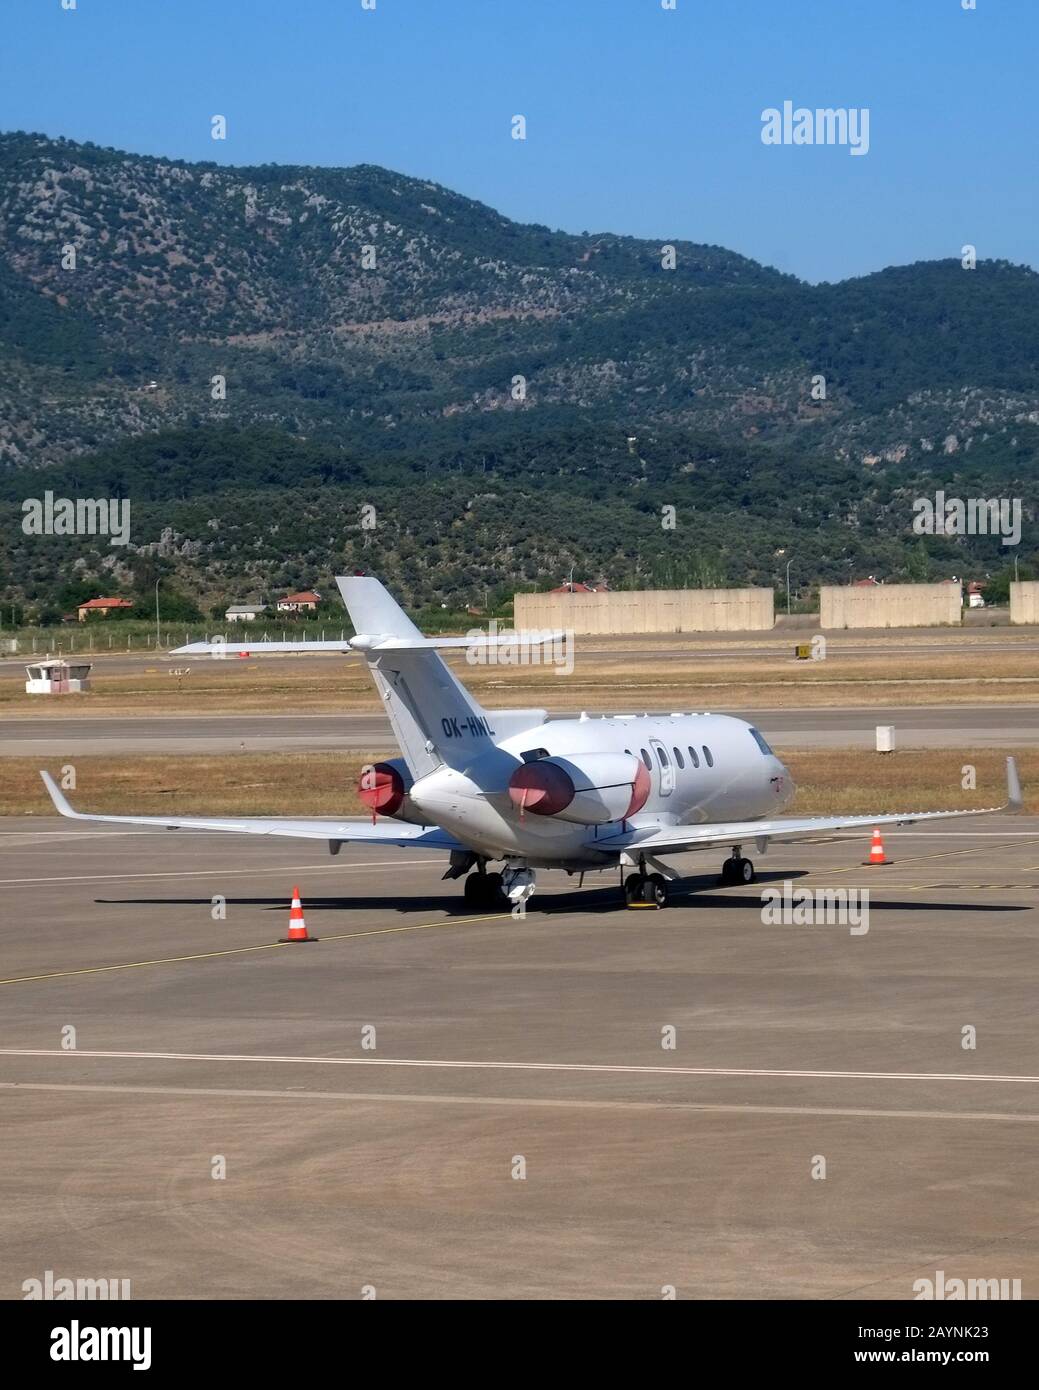 Dalaman Airport Resolution Stock Photography and - Alamy